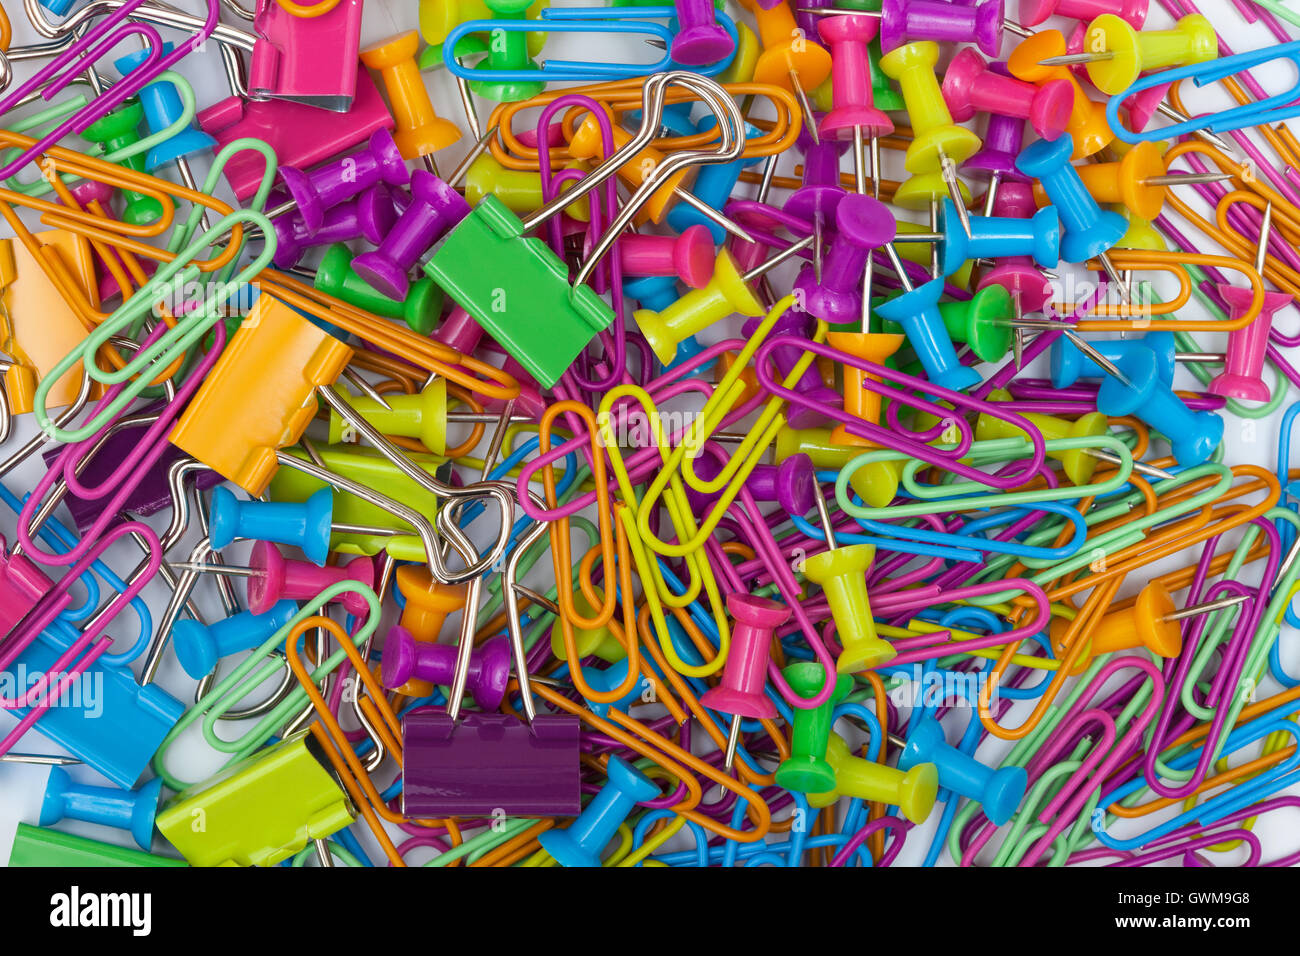 Office supplies - thumb tacks, paper cliups and paper clamps, full frame Stock Photo